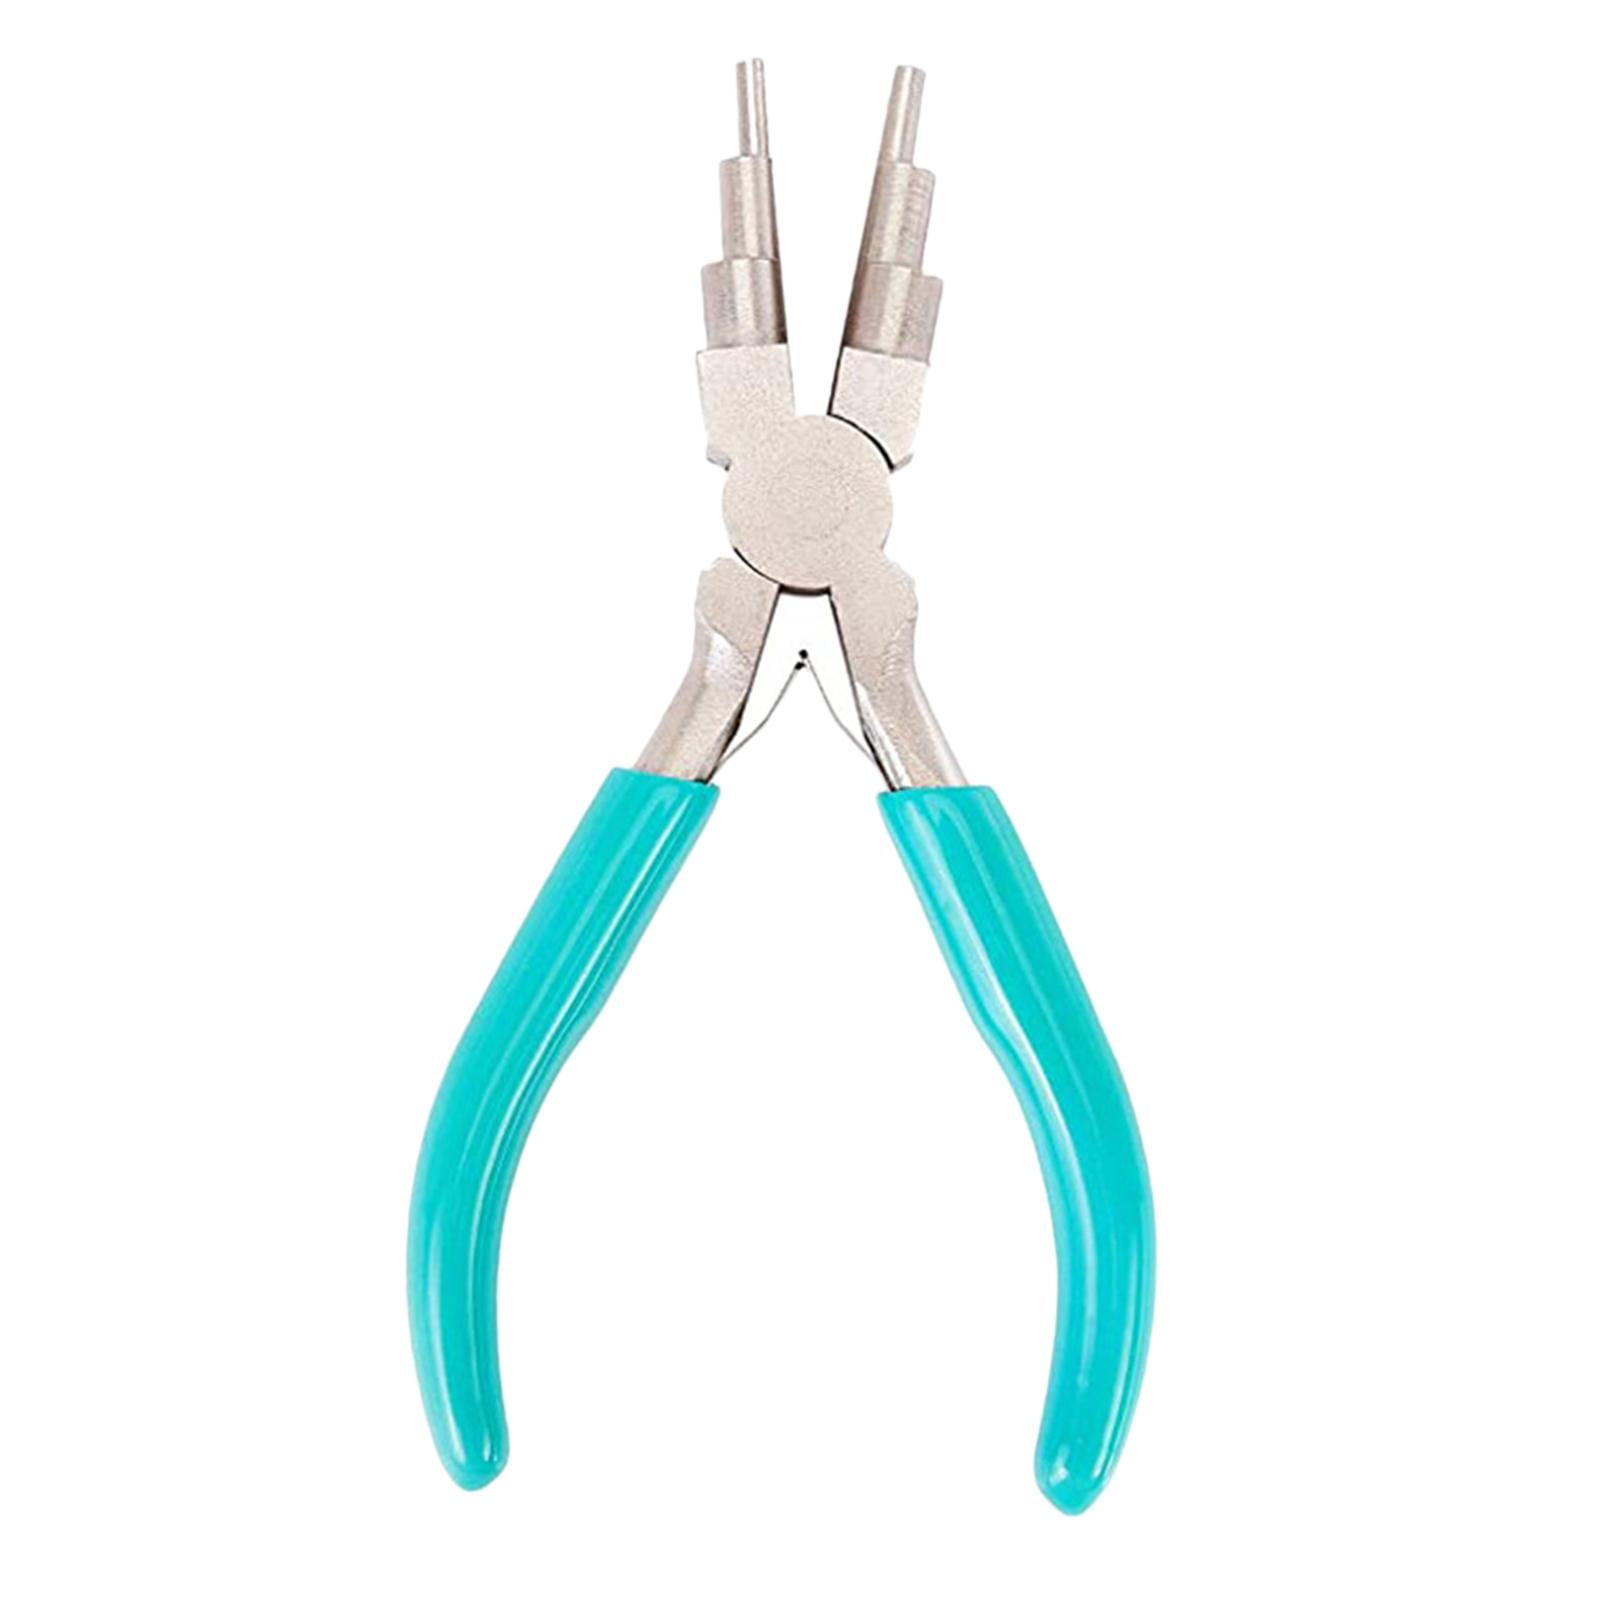 Nylon Nose Pliers Double Nylon Jaw Pliers Carbon Steel Pliers Plat Nose  Pliers DIY Tools for Beading Looping Shaping 